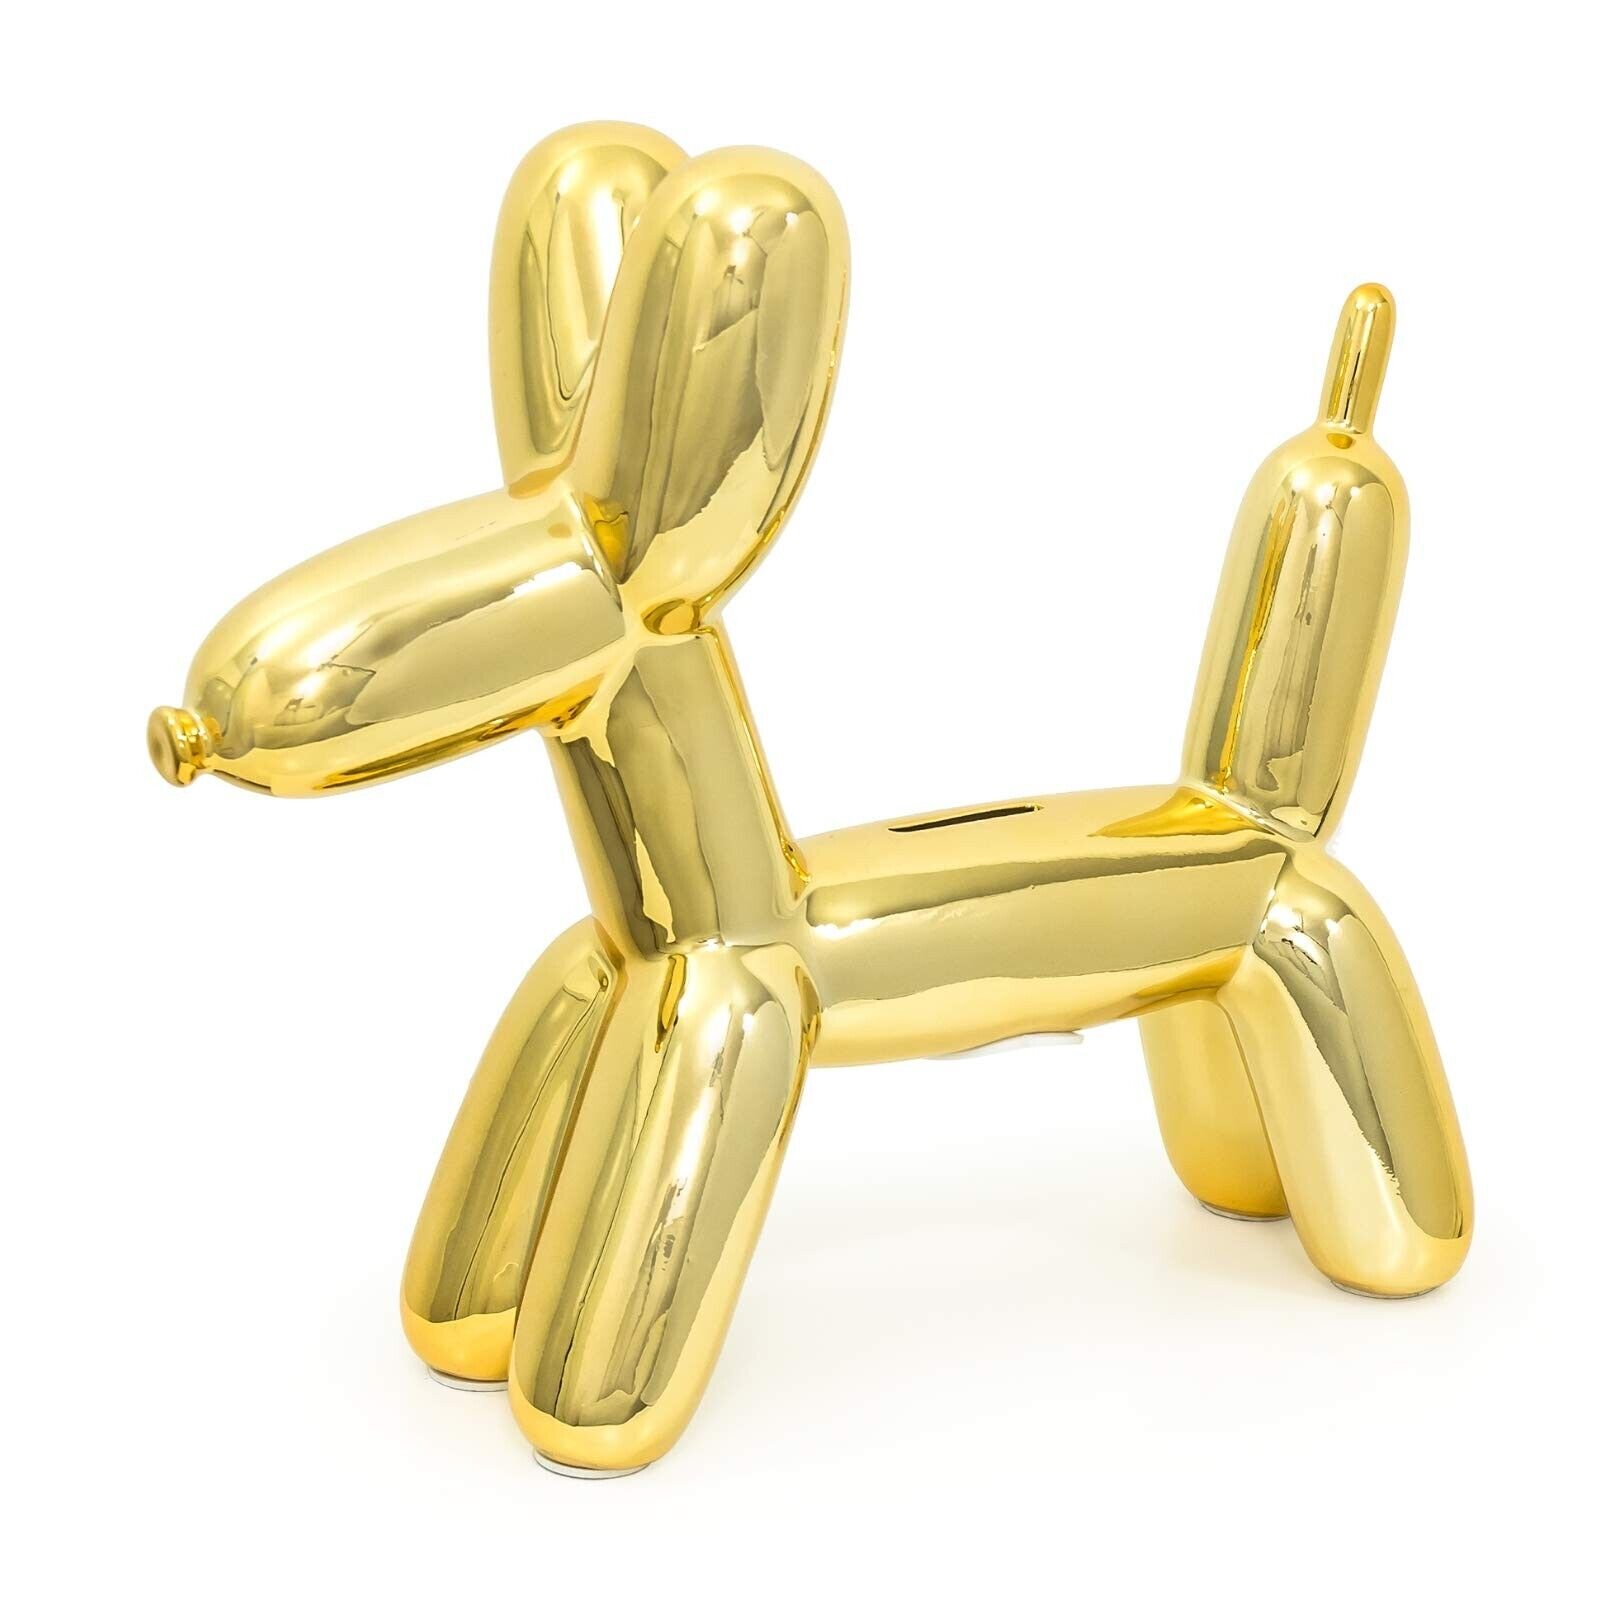 Balloon Dog Money Bank, Unique Ceramic Piggy Bank with High-Gloss Finish, Gold